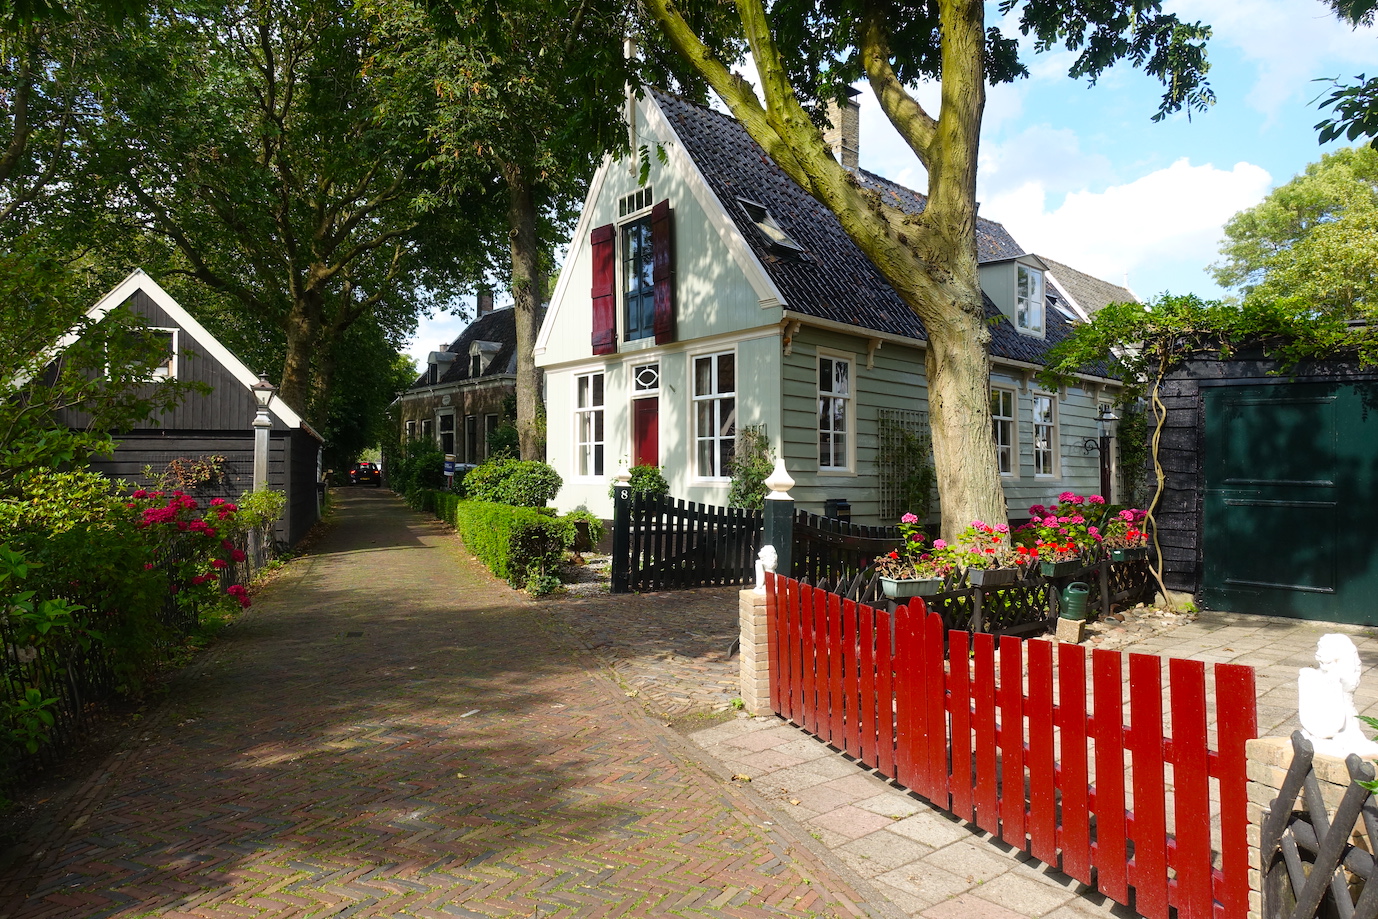 A street with wooden houses a red fence and some colorful flowers gardens in Broek in Waterland